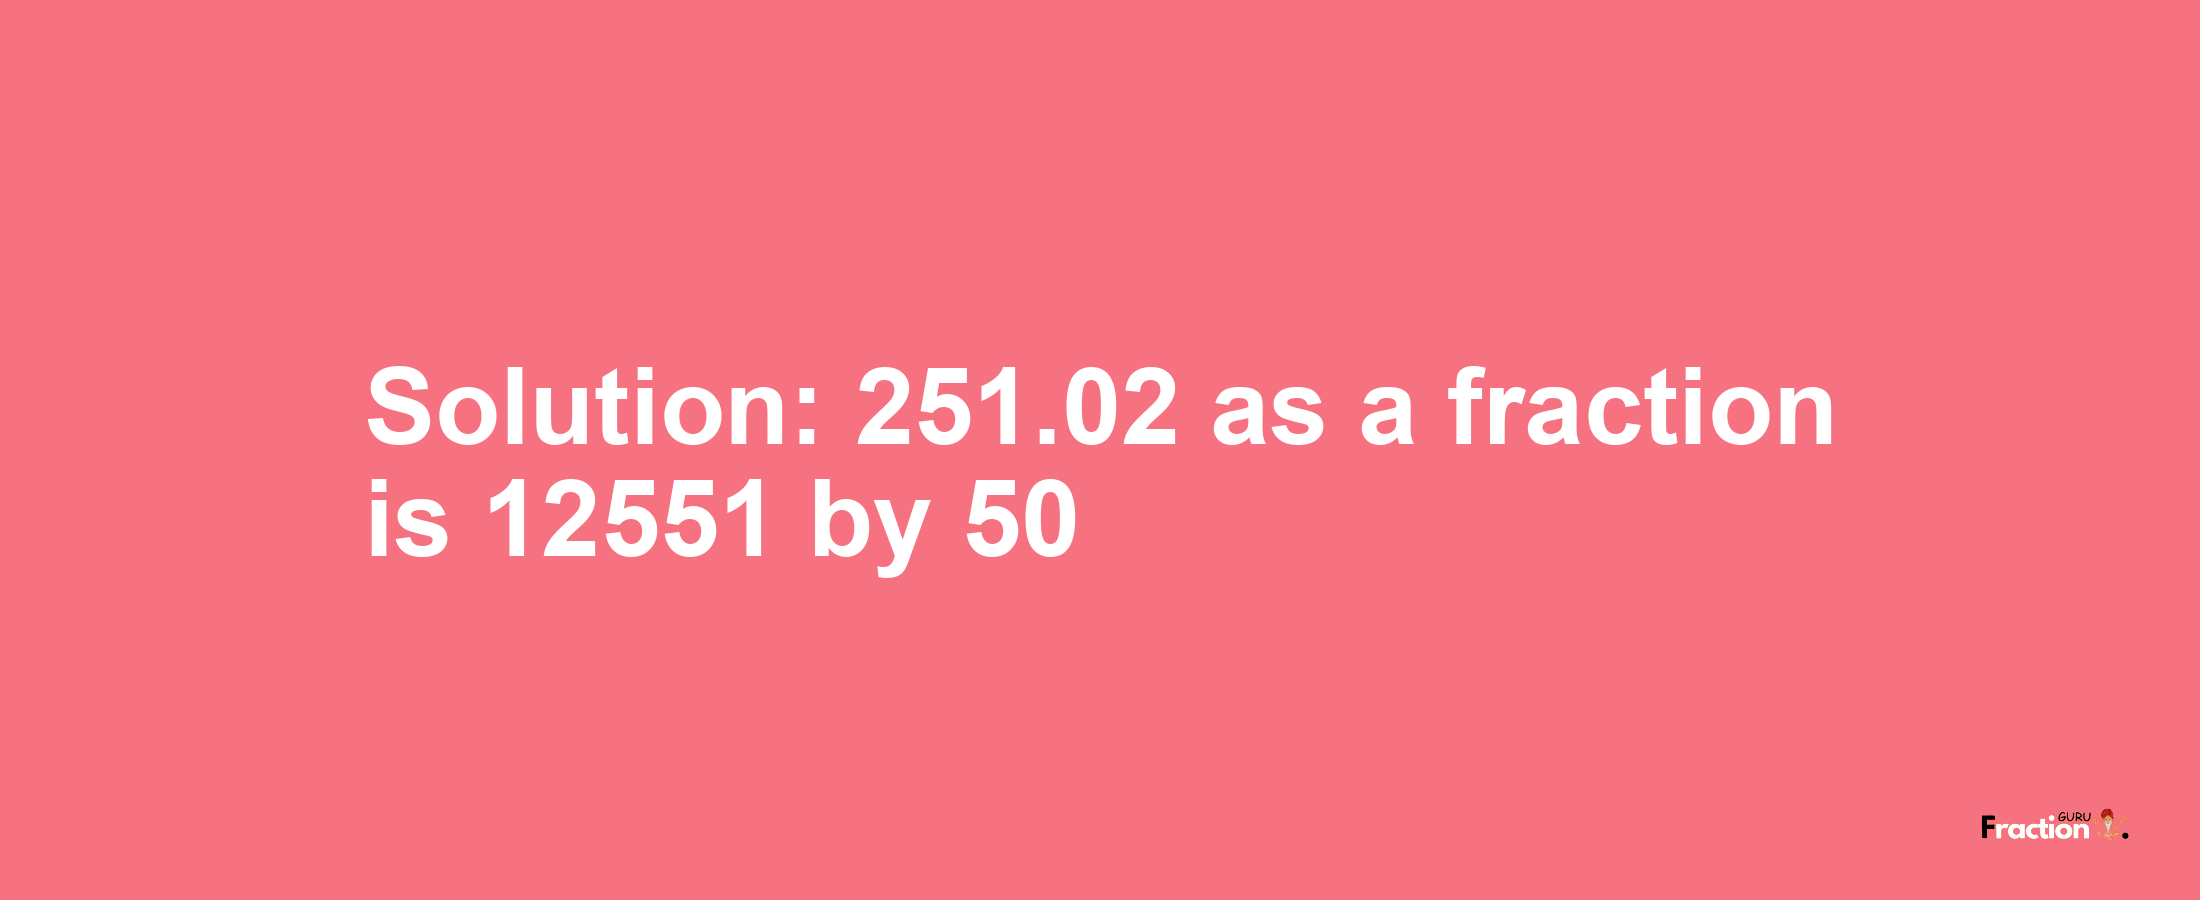 Solution:251.02 as a fraction is 12551/50